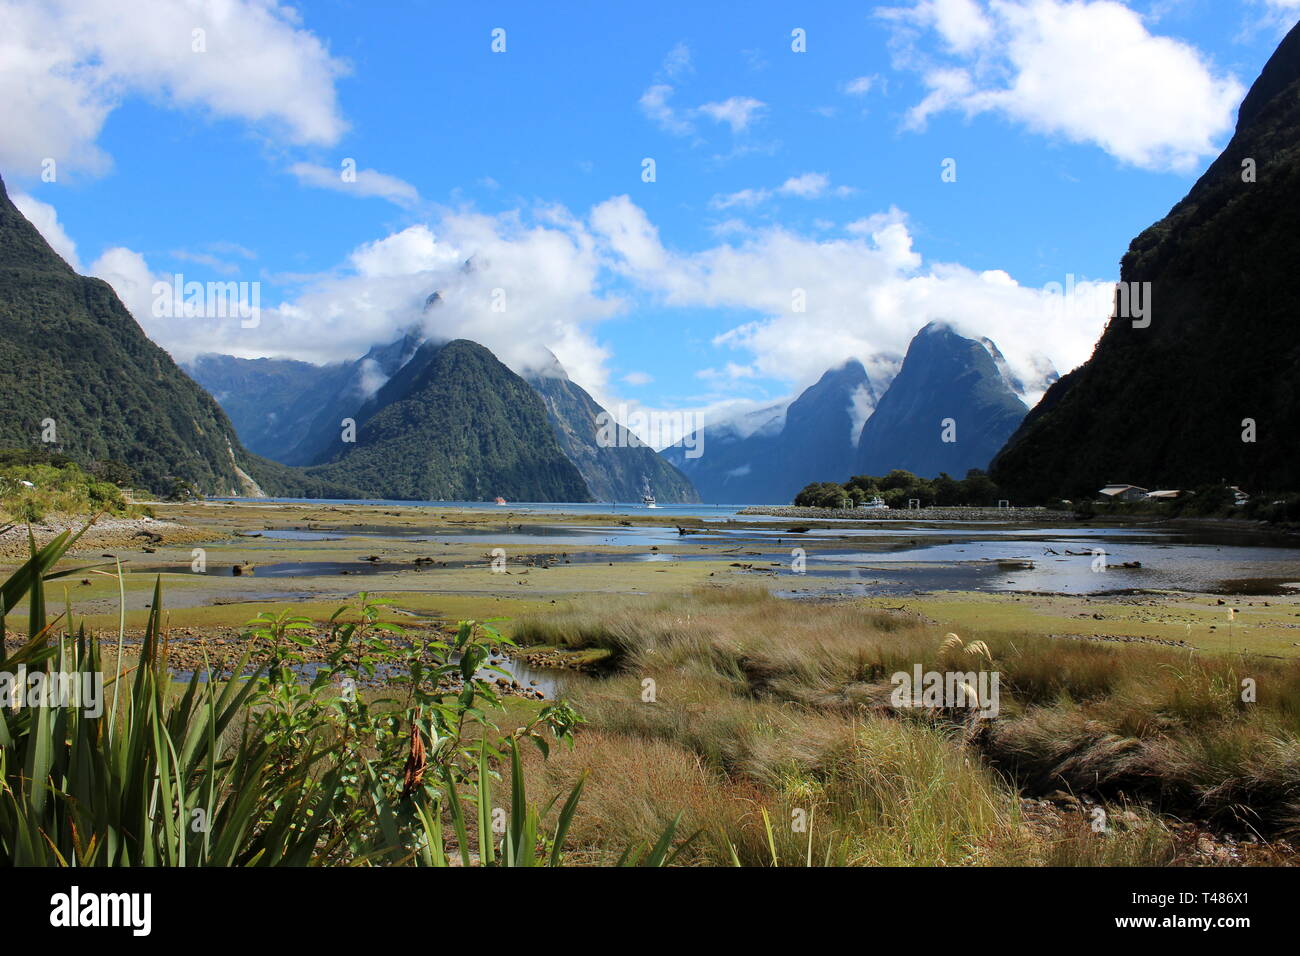 Milford Sound on a sunny day with clouds over the mountains, view from boat pier Stock Photo